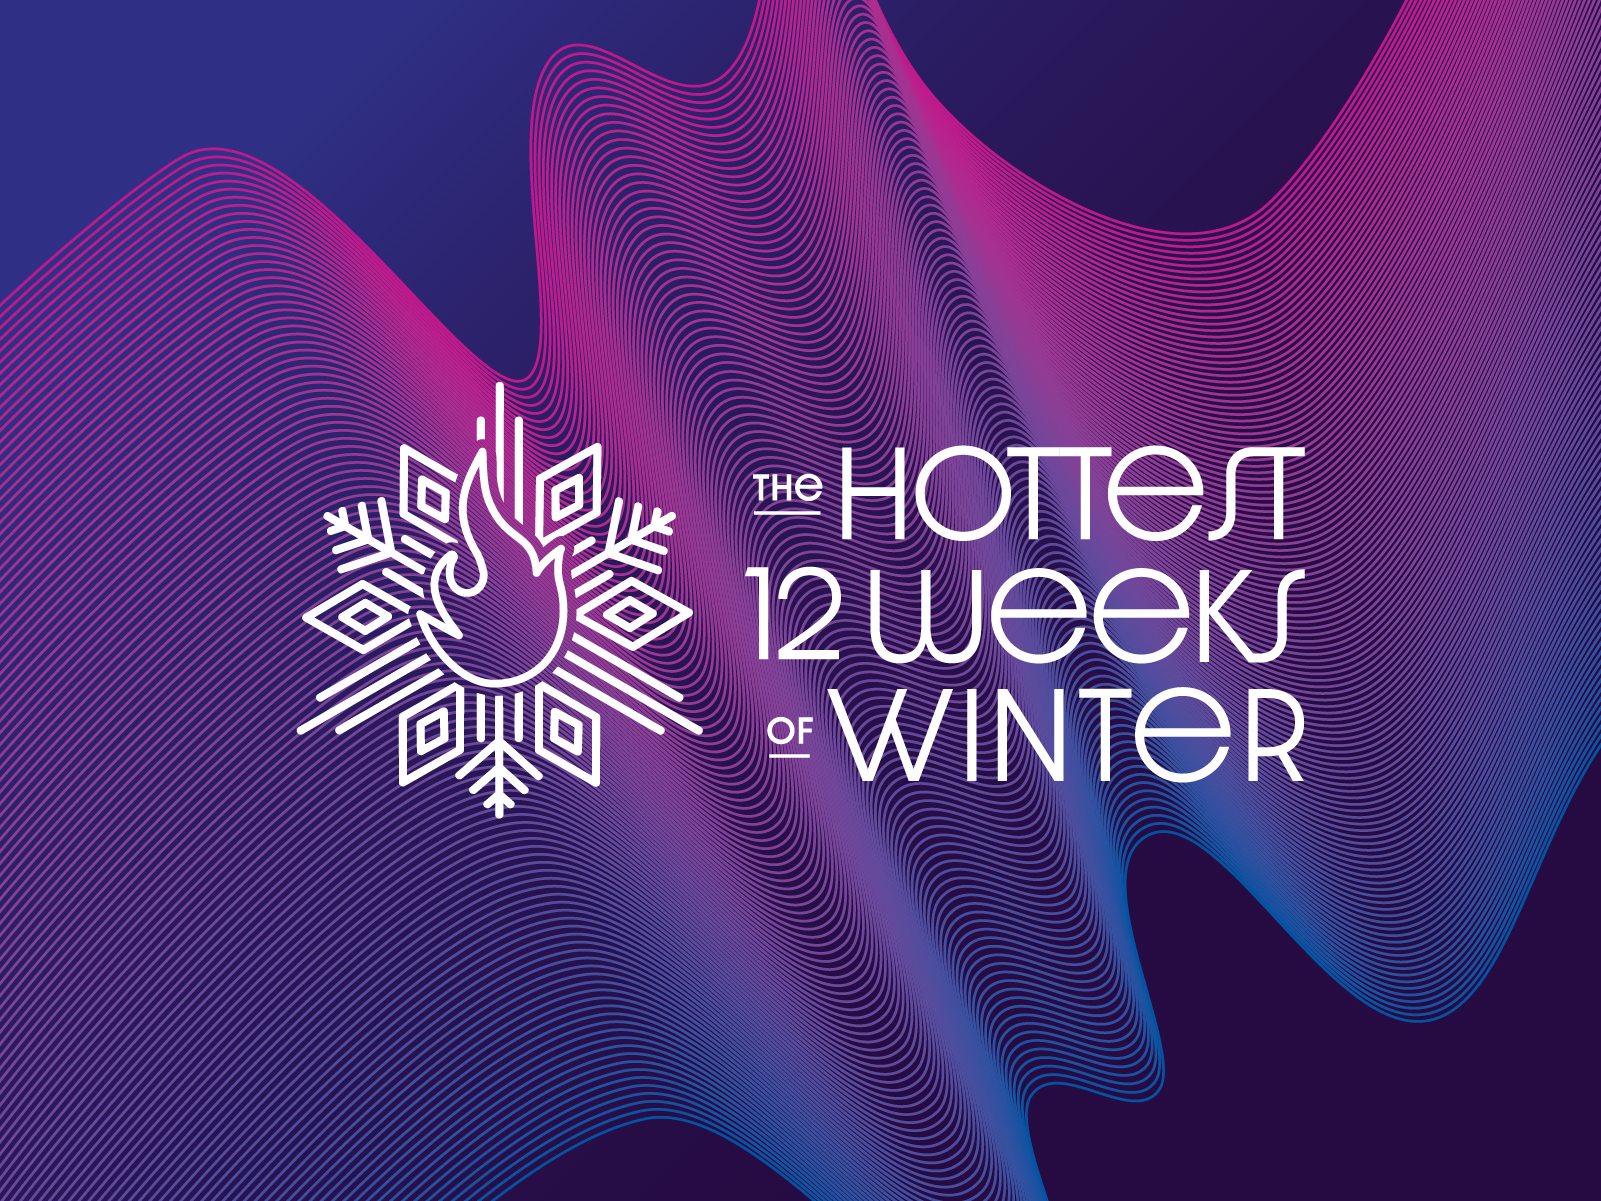 A graphic for The Hottest 12 Weeks of Winter